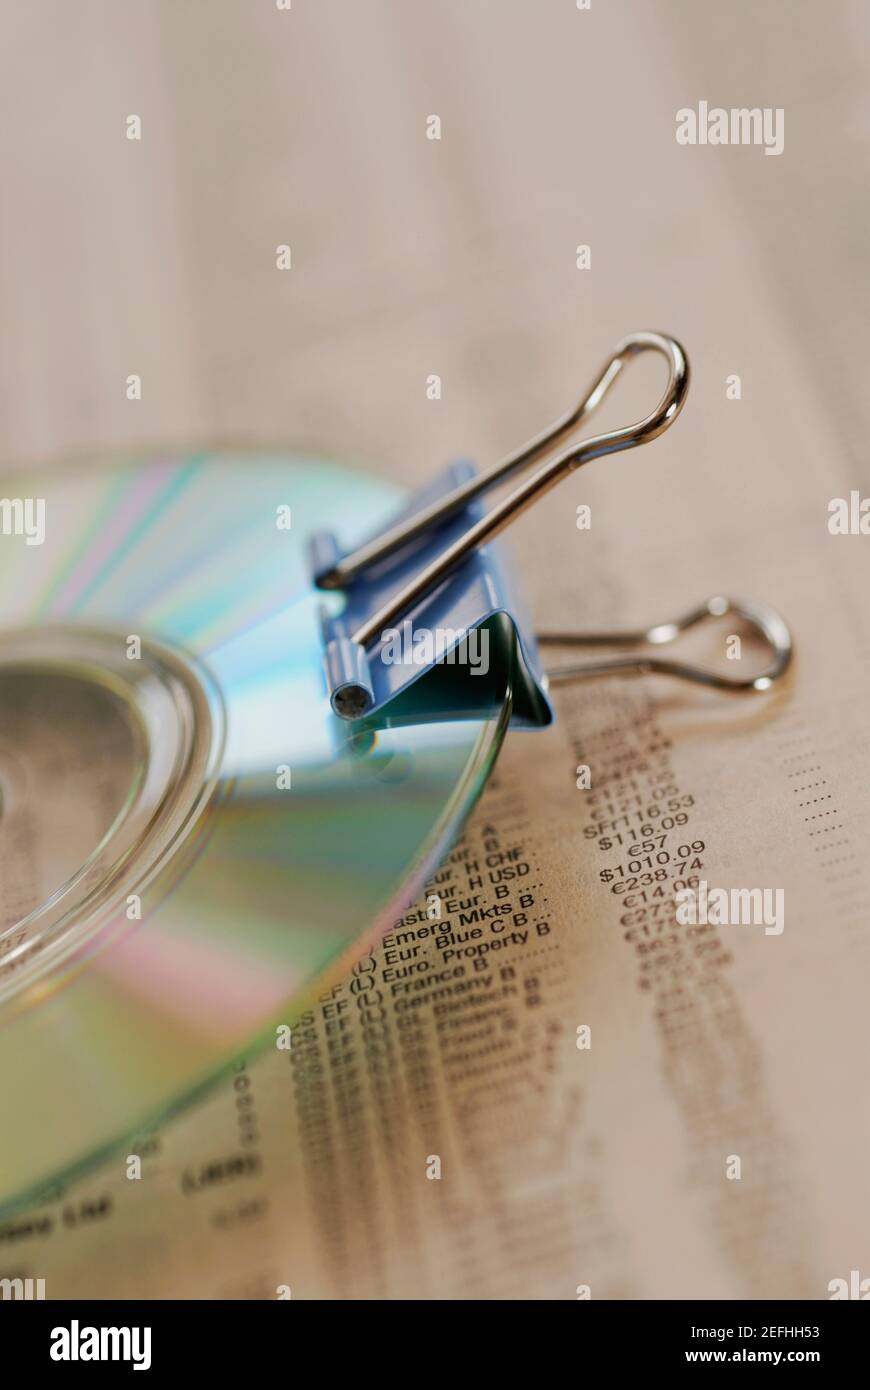 Close up of a CD with a paper clip on a financial page Stock Photo